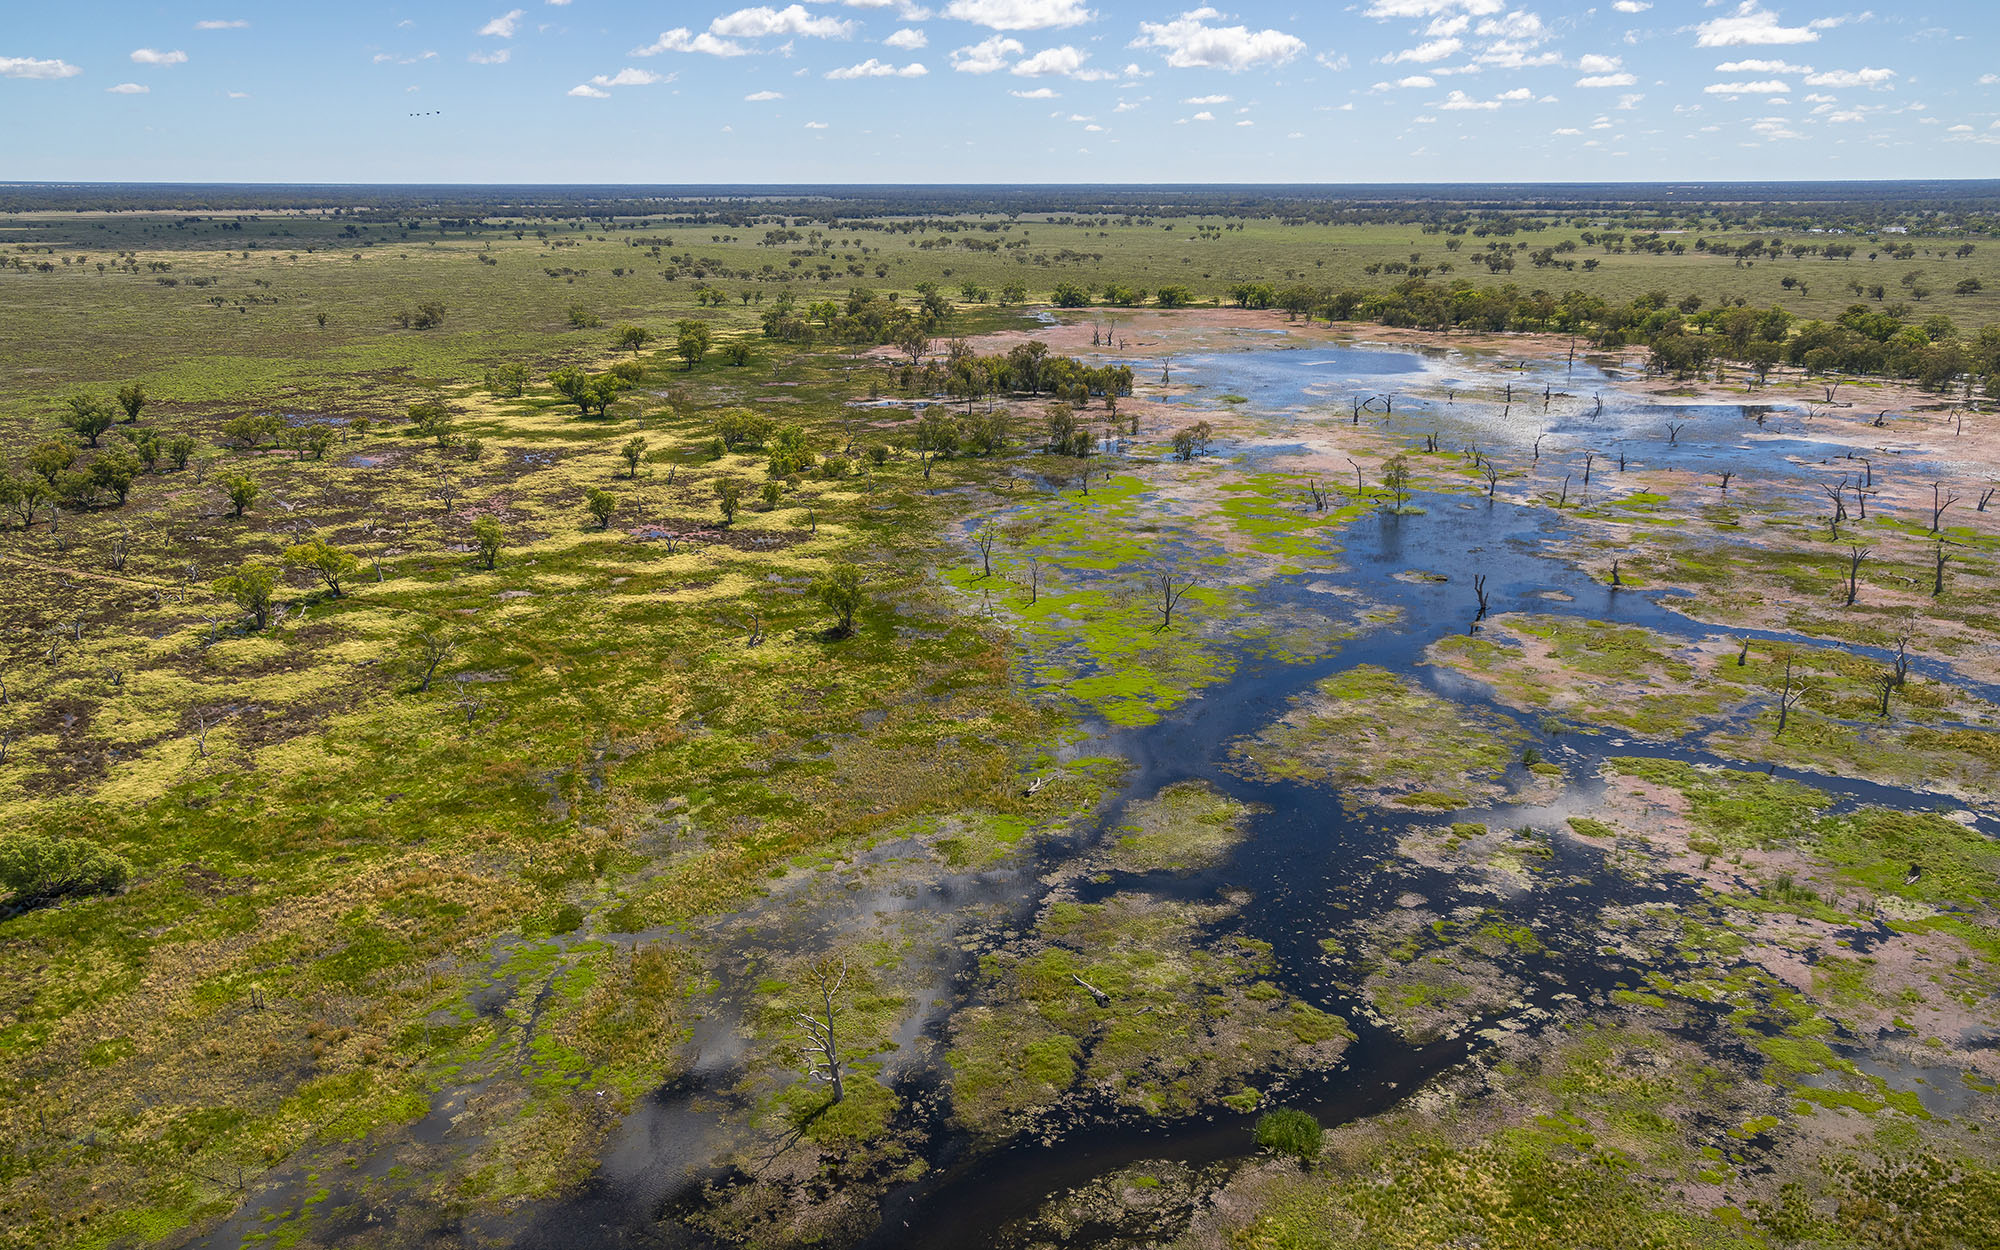 Southern lagoons, Macquarie Marshes Nature Reserve.